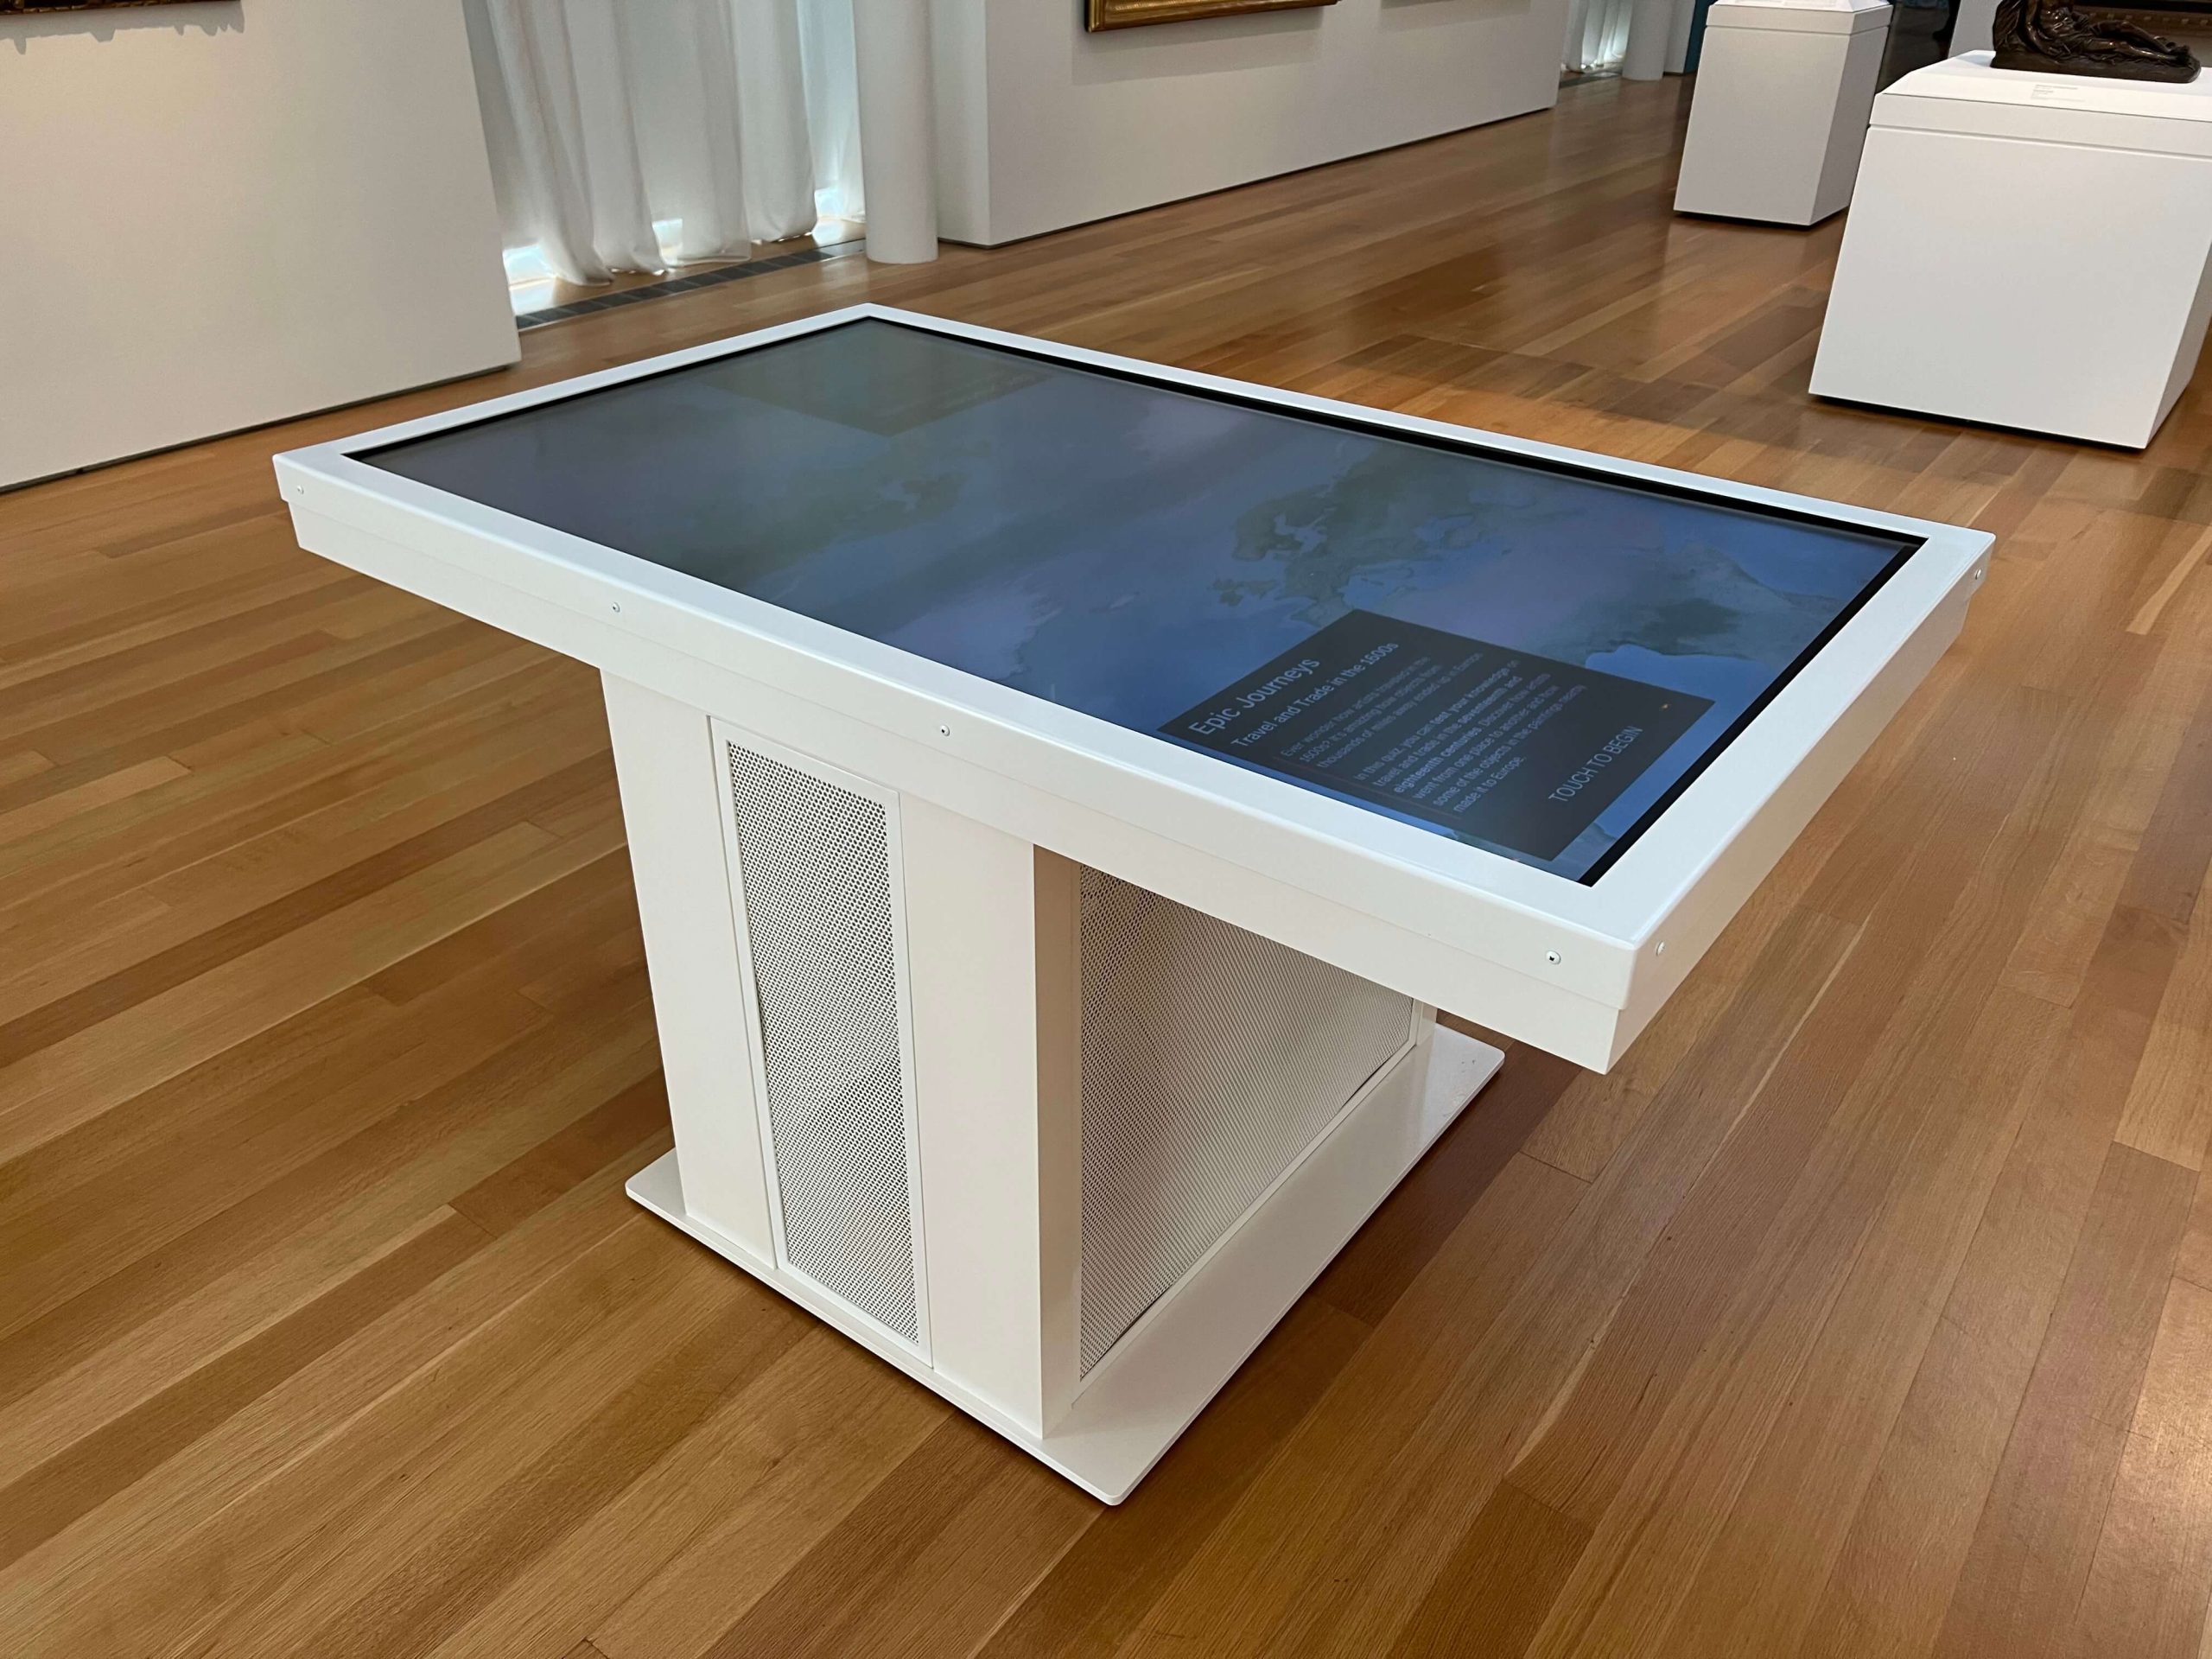 A large touchscreen display is installed horizontally, like a table, in an art museum gallery